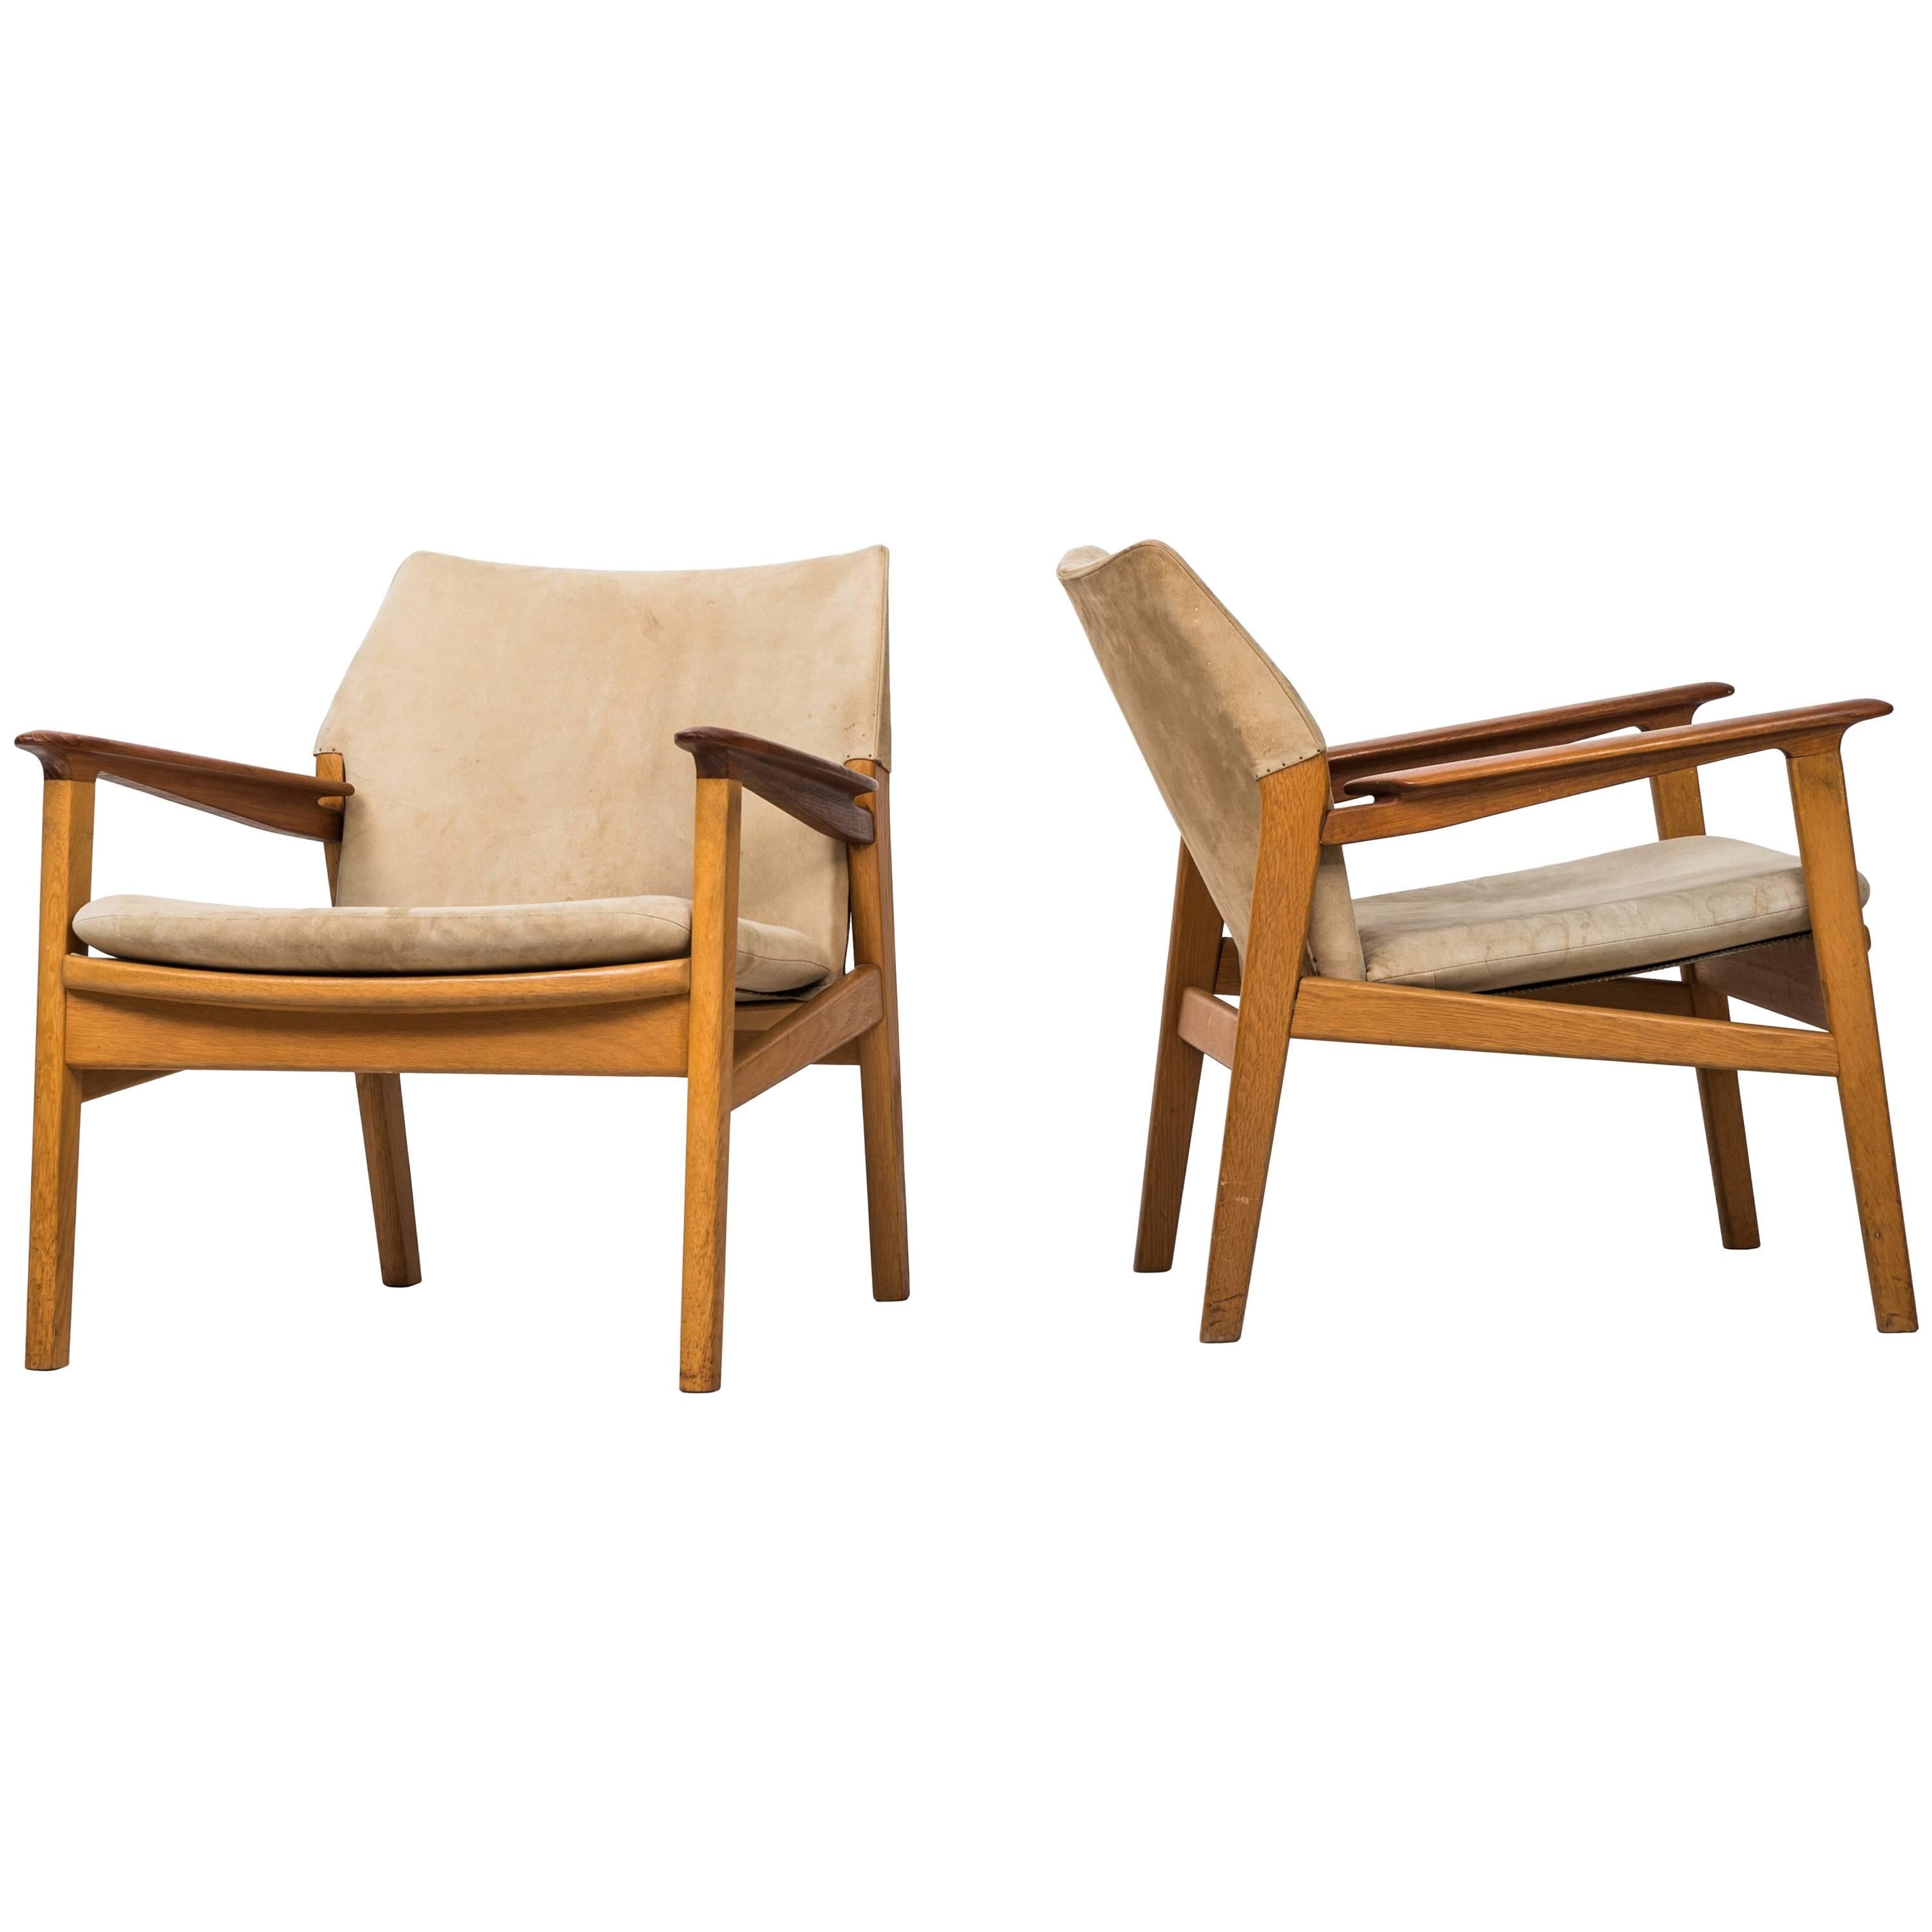 Hans Olsen Easy Chairs Model 9015 by Gärsnäs in Sweden